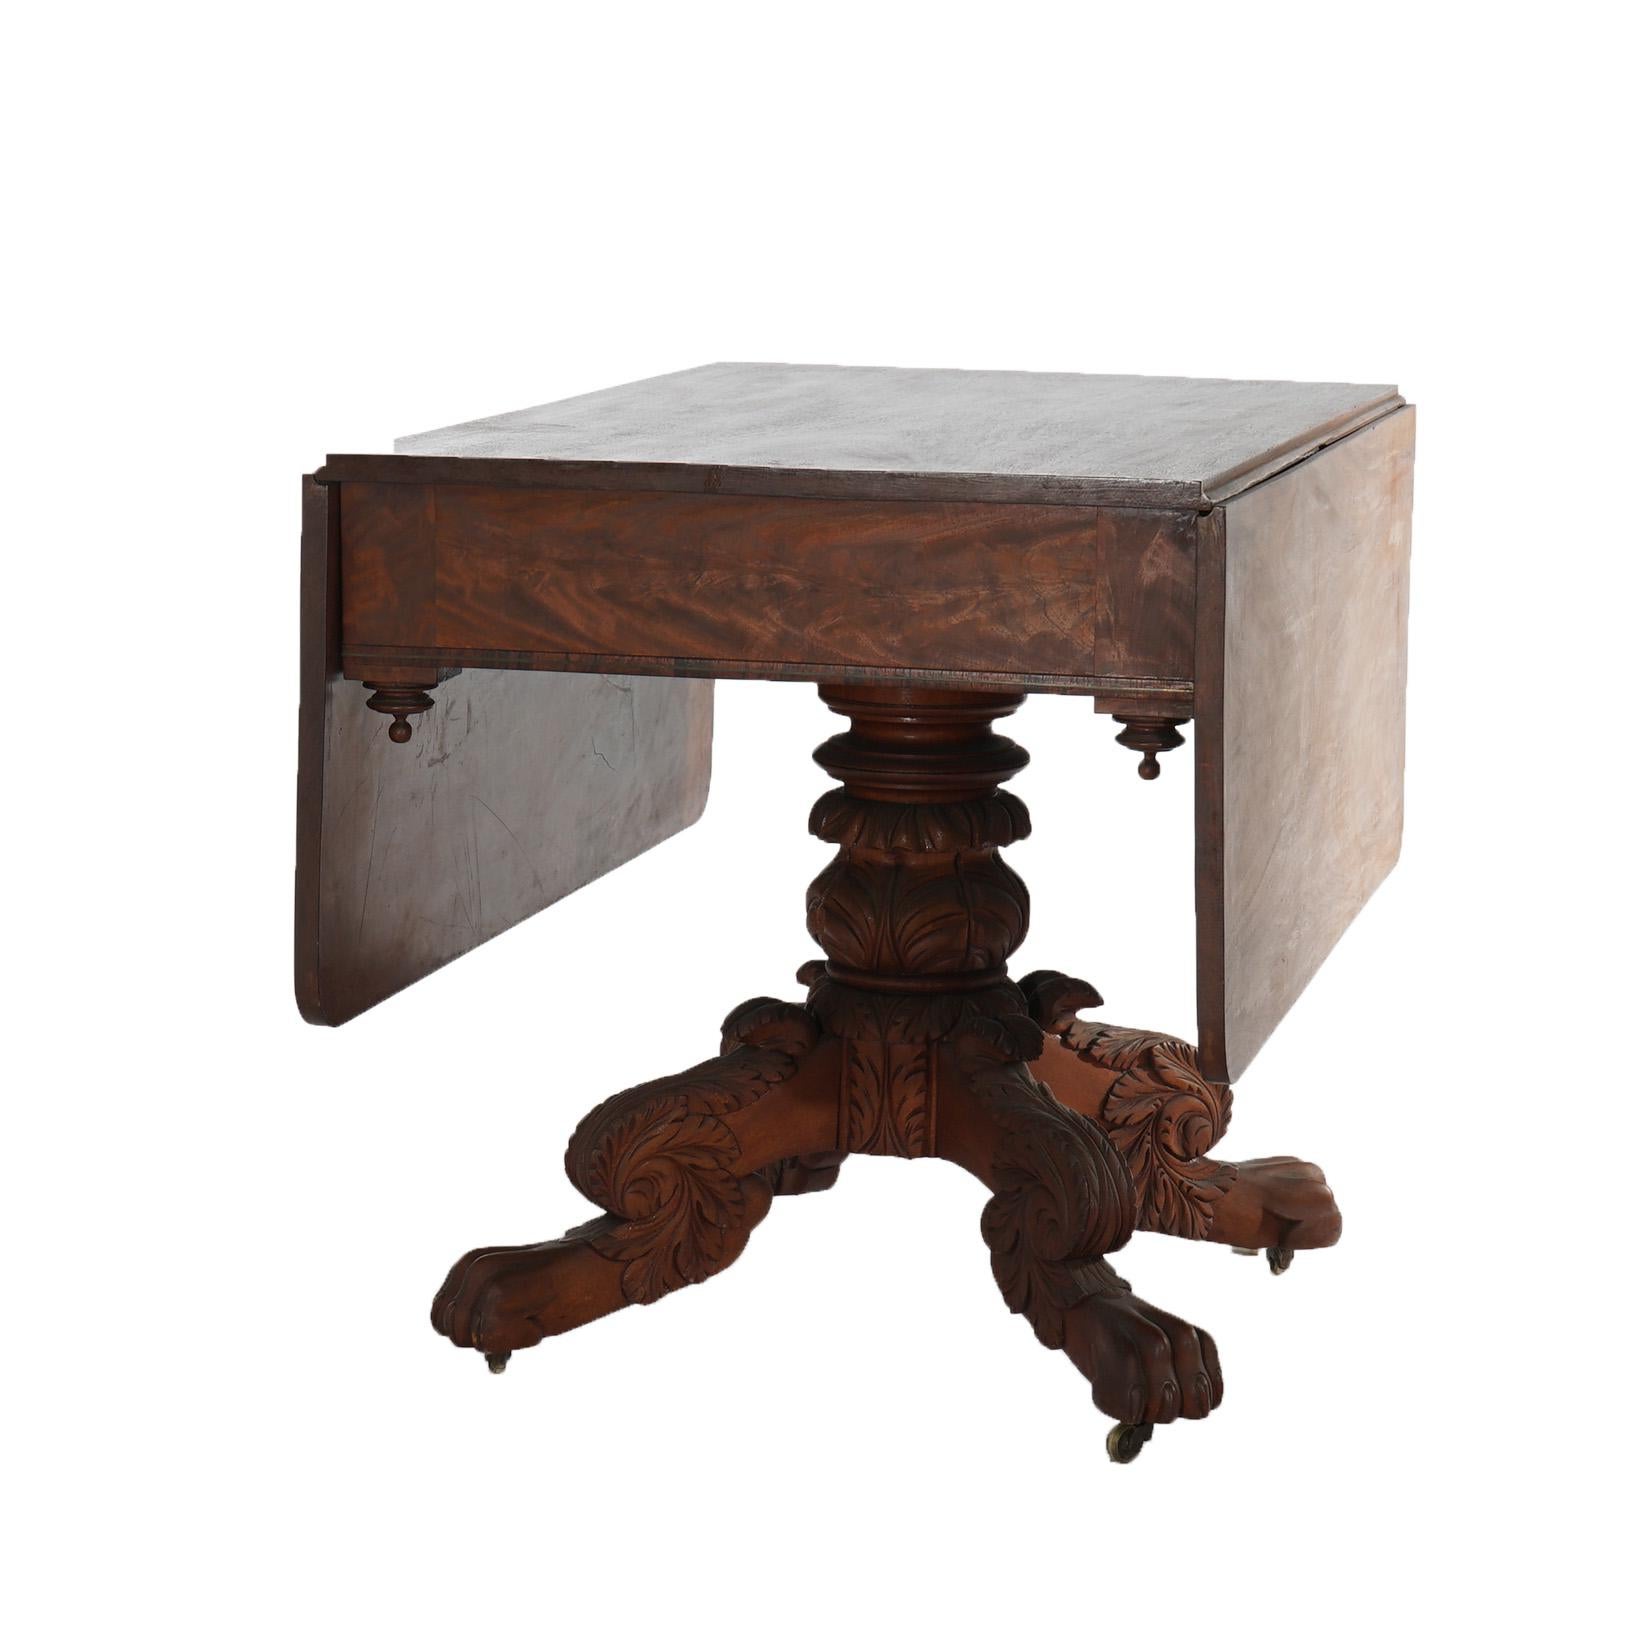 Antique Neoclassical American Empire Carved Flame Mahogany Drop Leaf Table c1880 For Sale 9